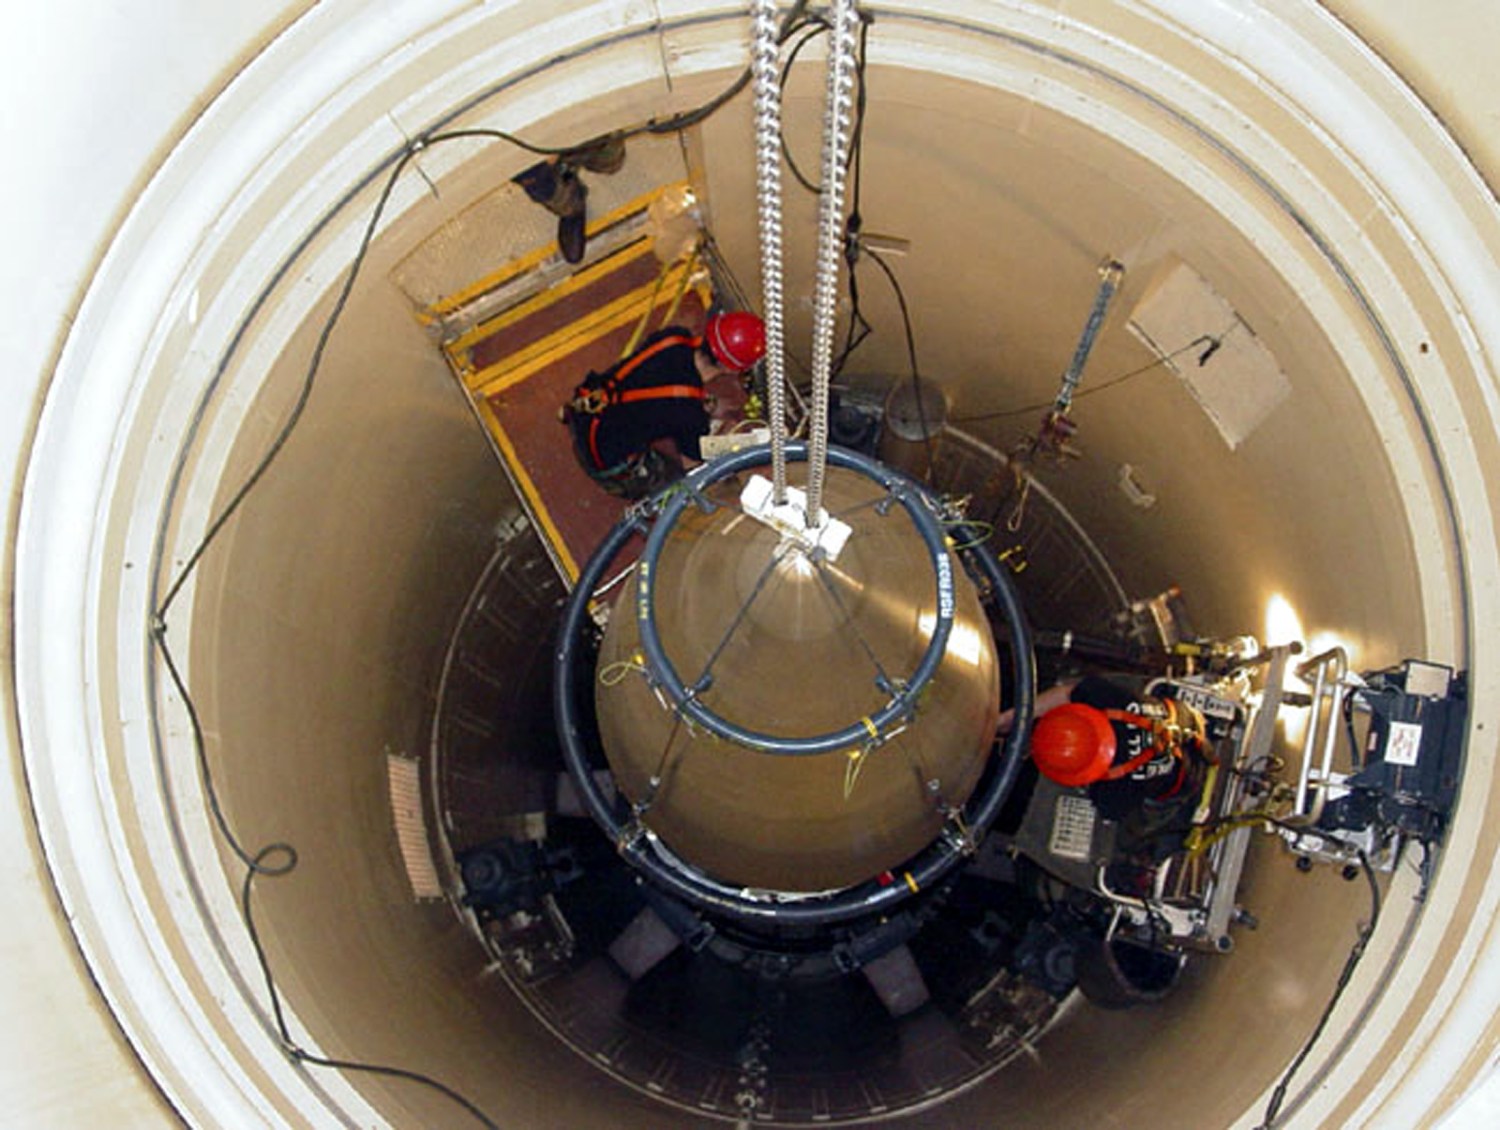 A US Air Force missile maintenance team removes the upper section of an intercontinental ballistic missile with a nuclear warhead in an undated USAF photo at Malmstrom Air Force Base, Montana. Reviews of the U.S. nuclear arsenal show significant changes are needed to ensure the security and effectiveness of the force, a Defense Department report said November 14, 2014.  REUTERS/USAF/Airman John Parie/handout via Reuters (UNITED STATES - Tags: MILITARY POLITICS) FOR EDITORIAL USE ONLY. NOT FOR SALE FOR MARKETING OR ADVERTISING CAMPAIGNS. THIS IMAGE HAS BEEN SUPPLIED BY A THIRD PARTY. IT IS DISTRIBUTED, EXACTLY AS RECEIVED BY REUTERS, AS A SERVICE TO CLIENTS - TM3EABE0Z0U01